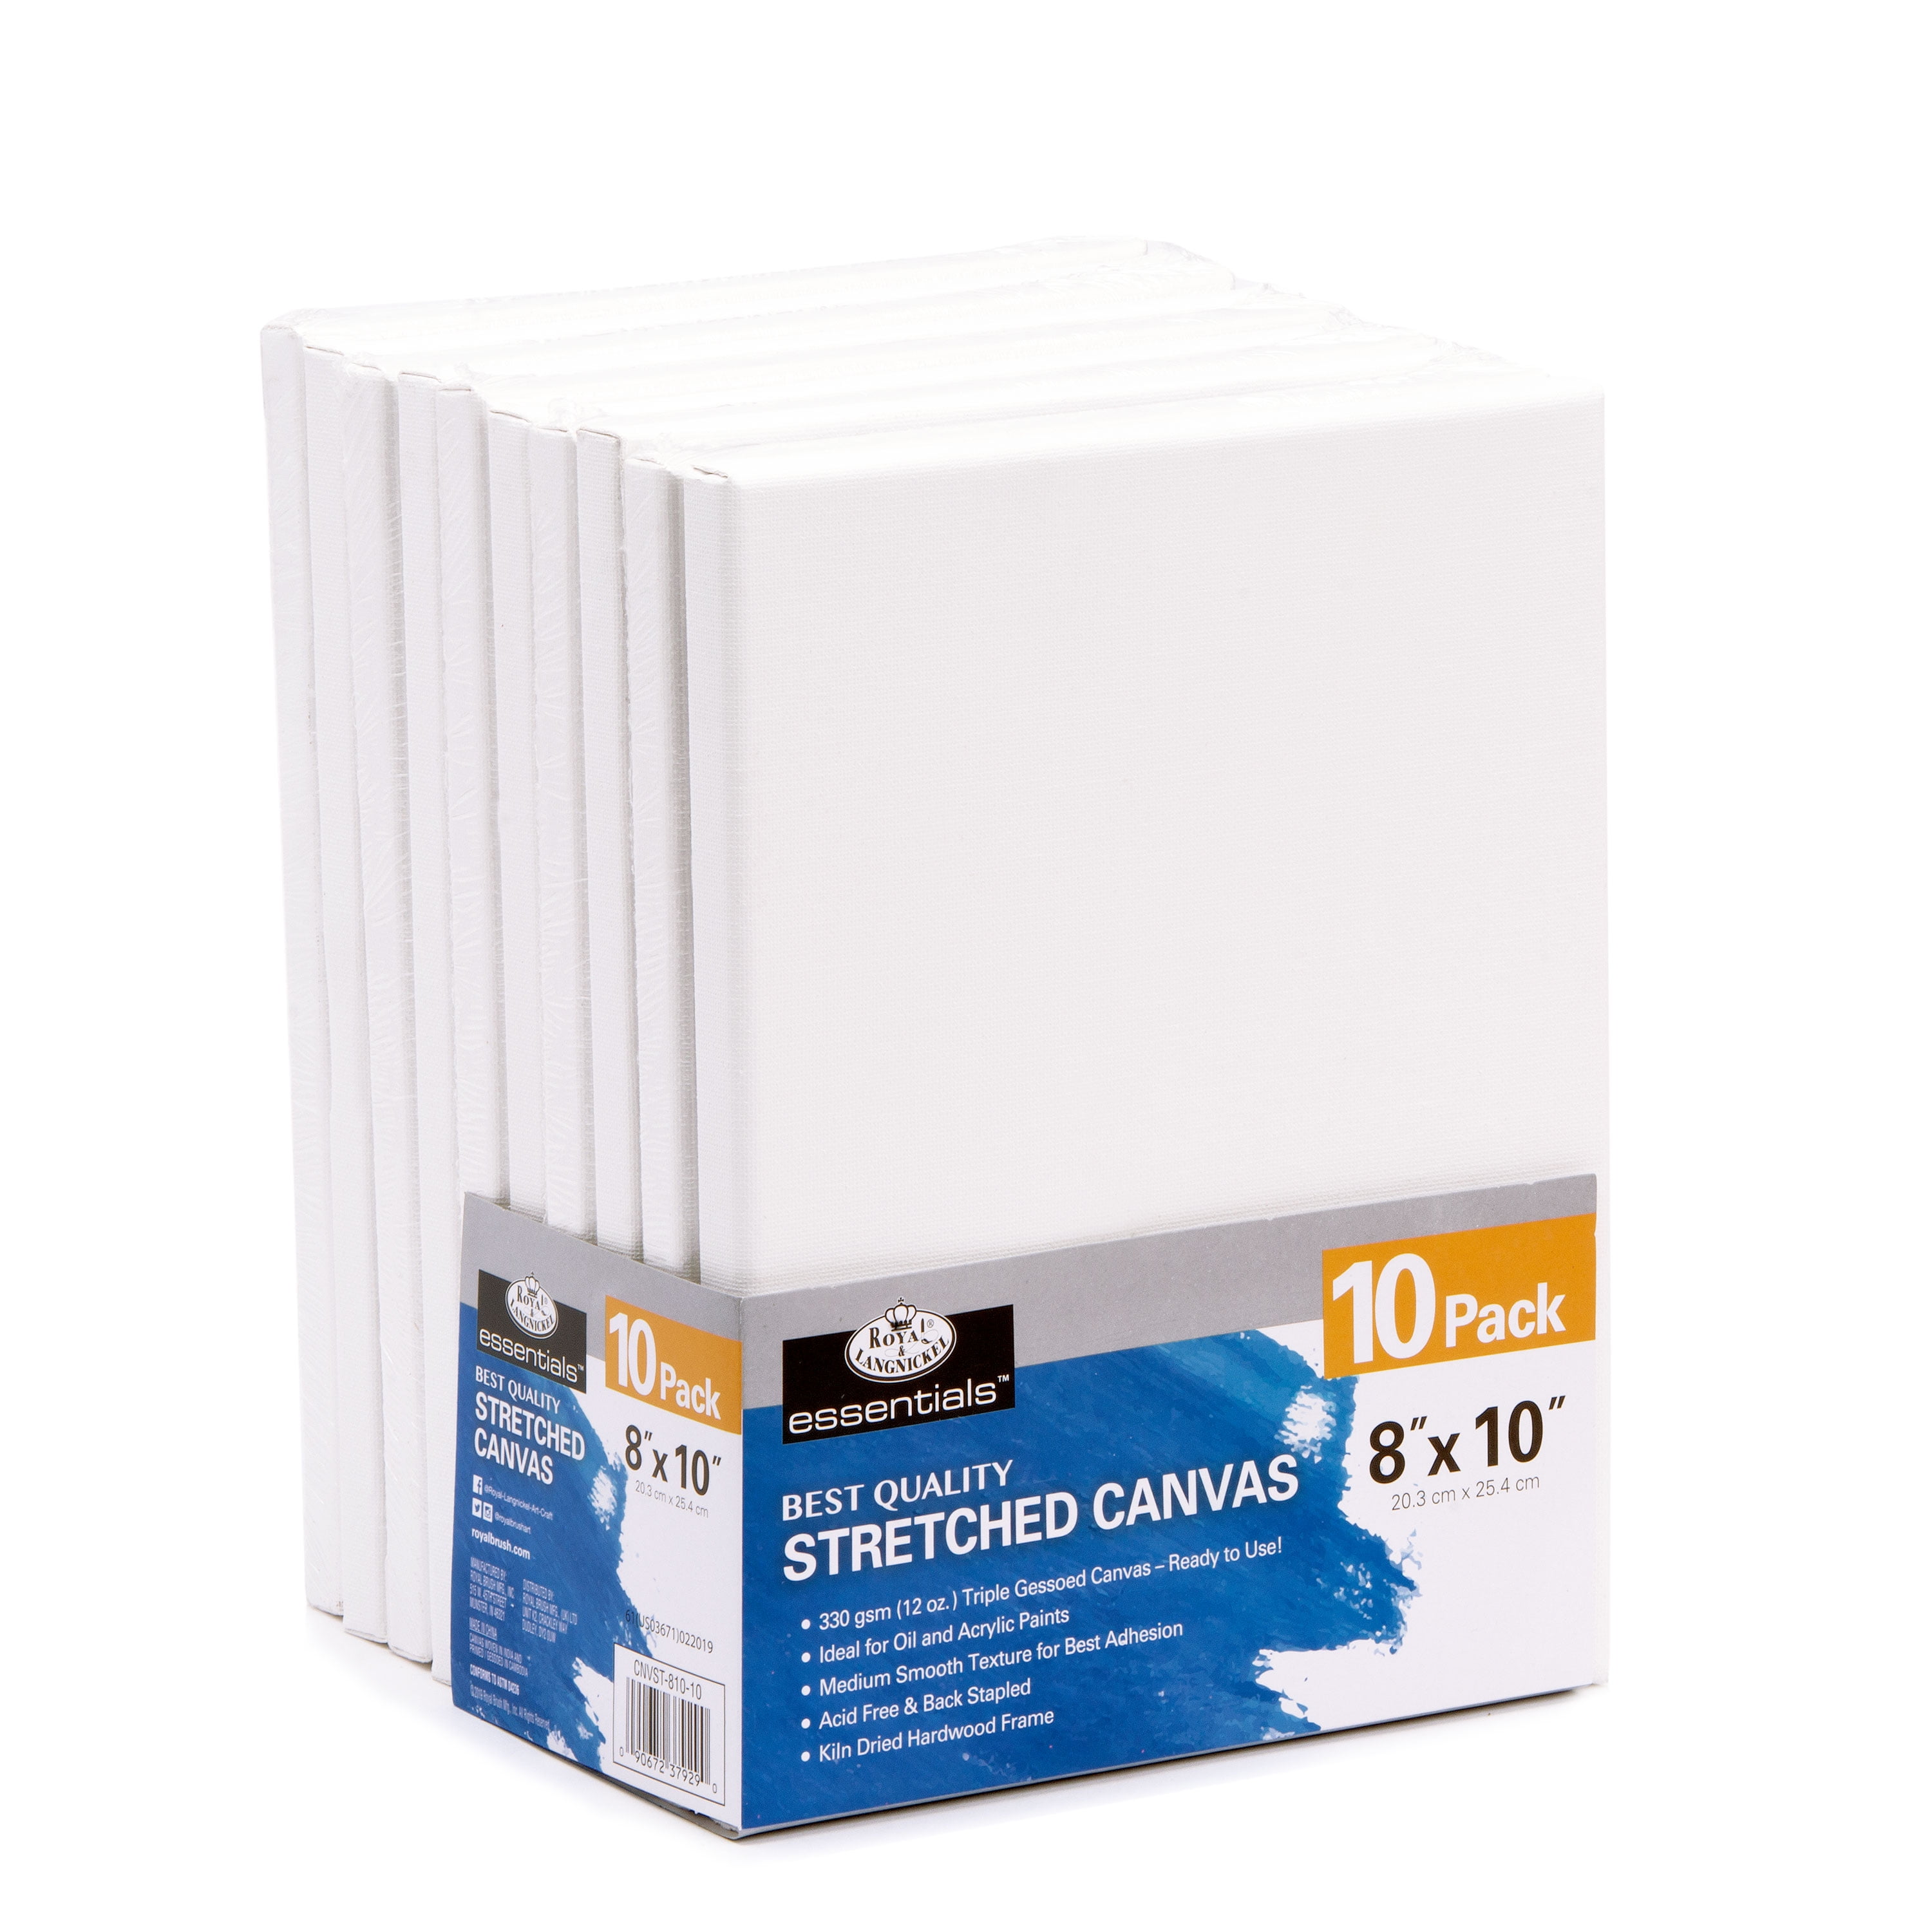 US Art Supply 4 x 6 Mini Professional Primed Stretched Canvas (1-Pack of  12-Mini Canvases)